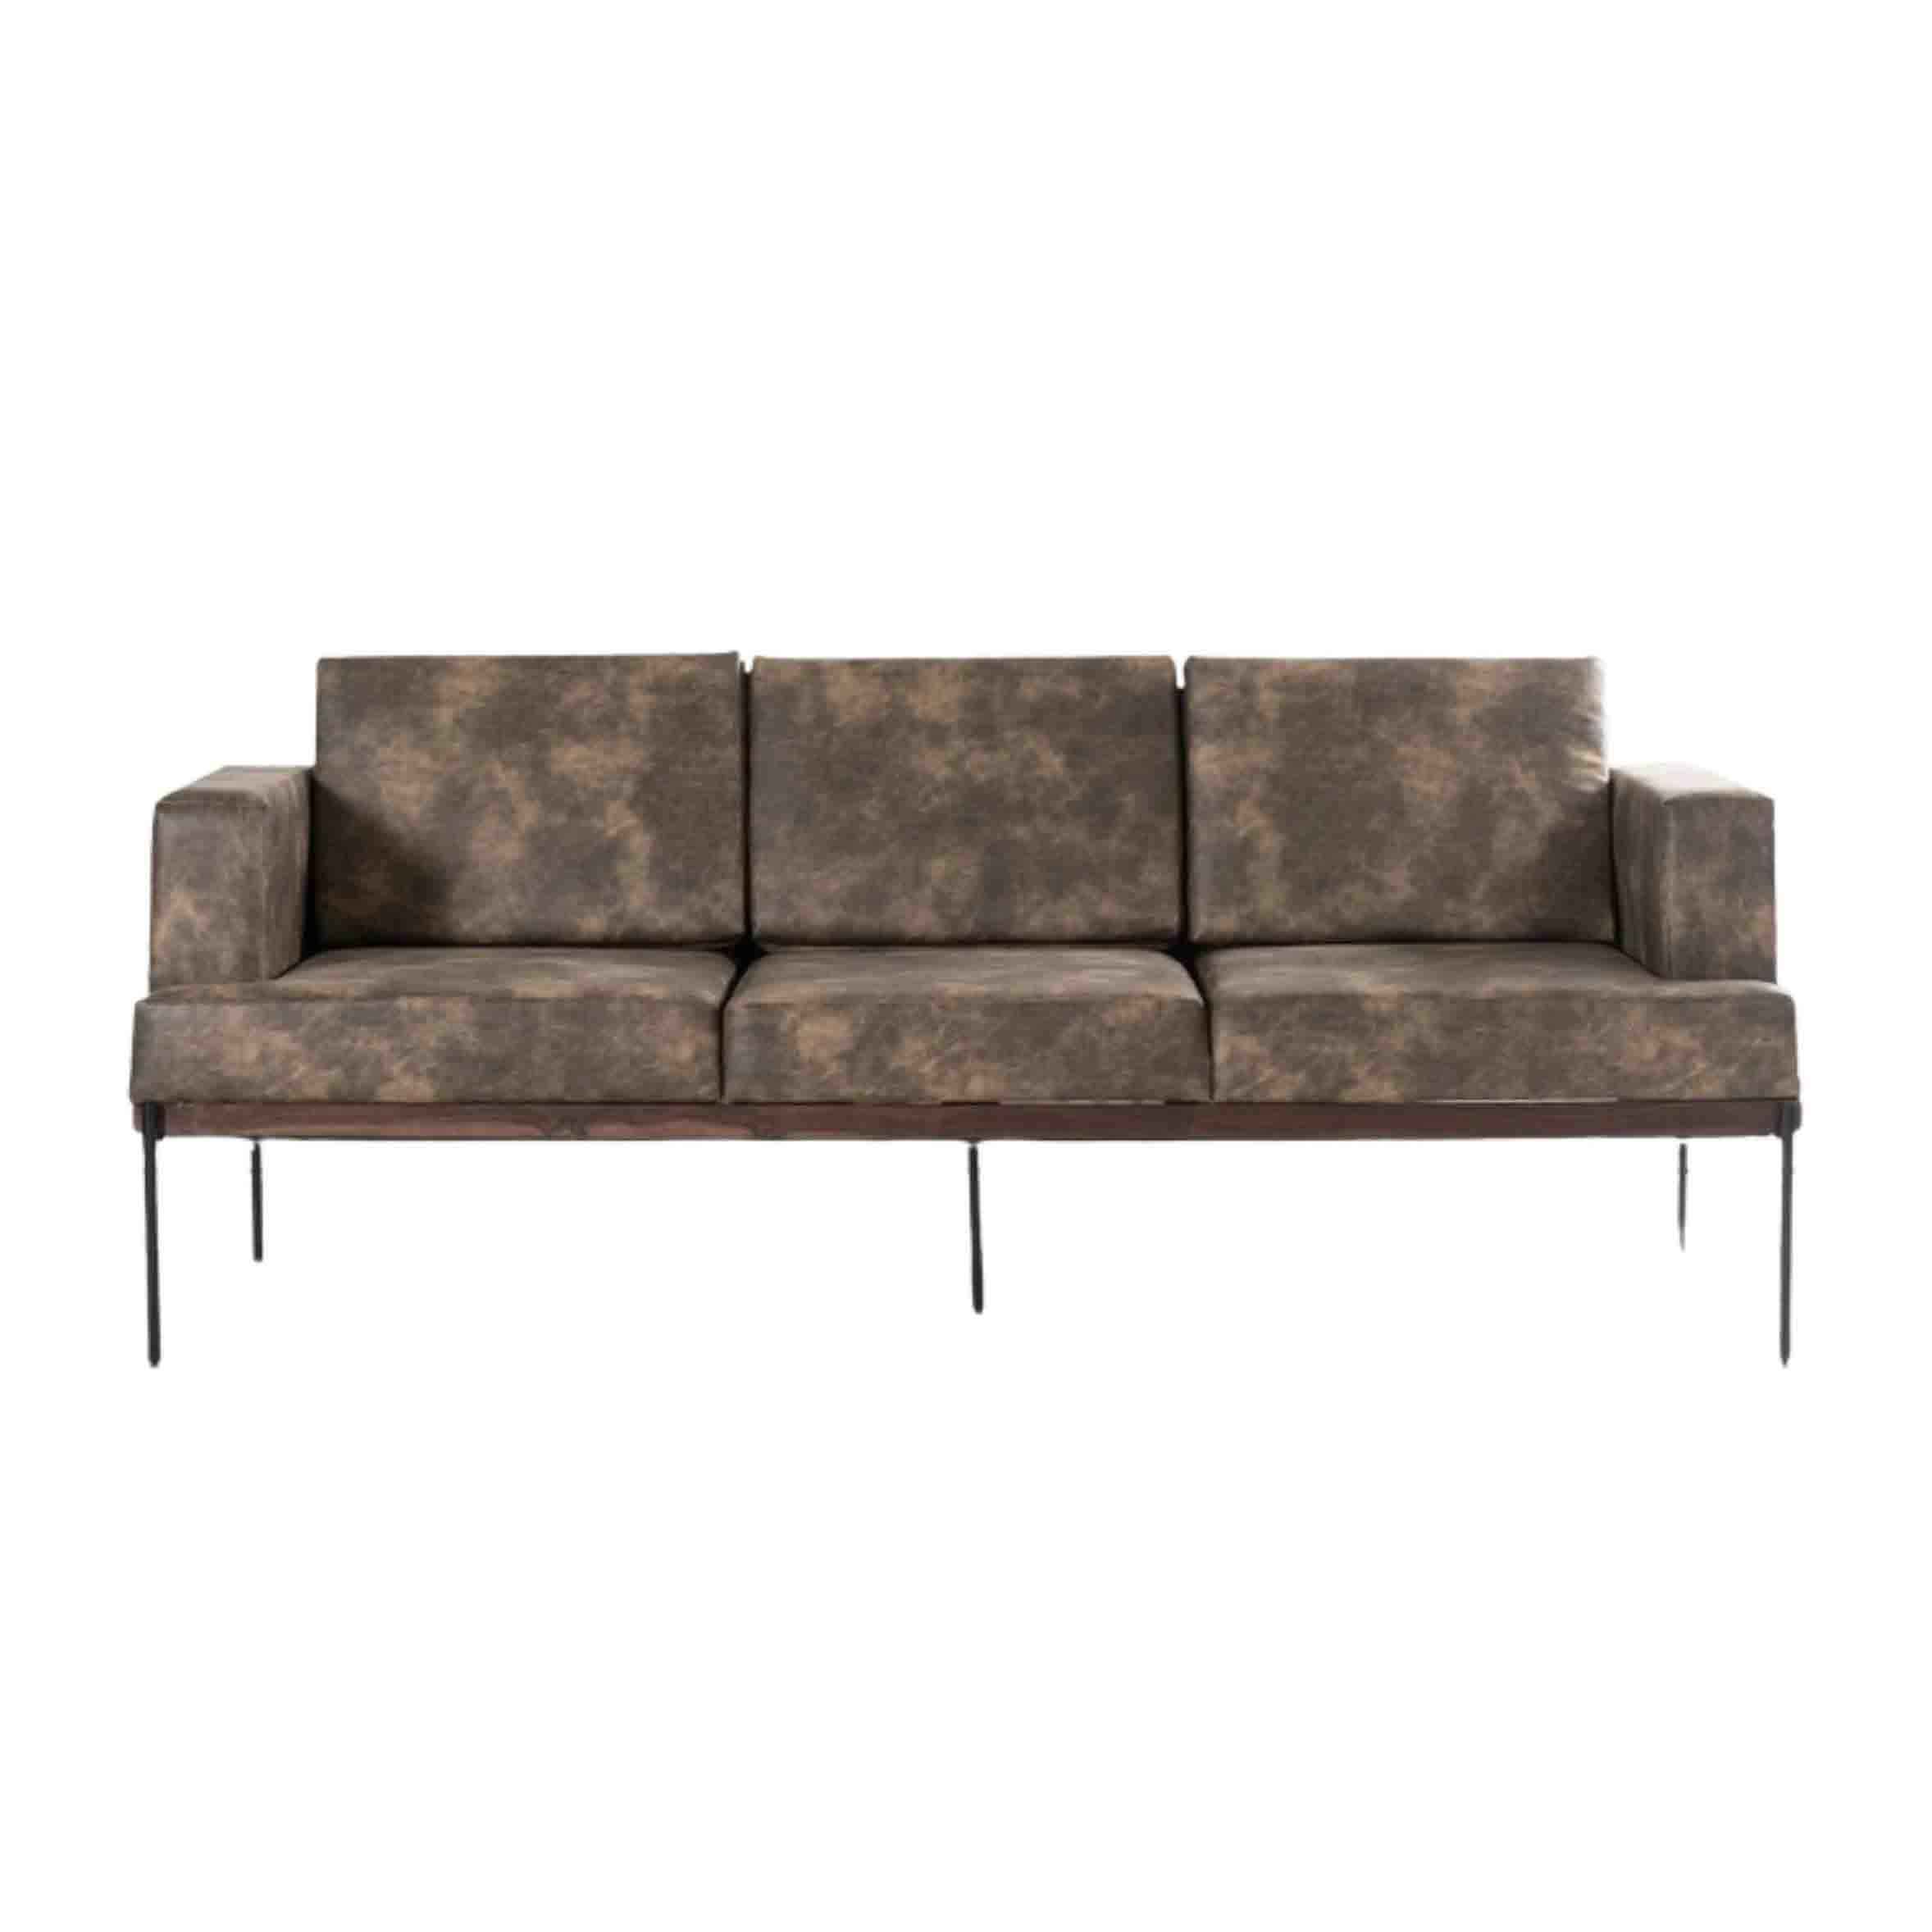 Adams Chaise Sectional Sofa With Ottoman